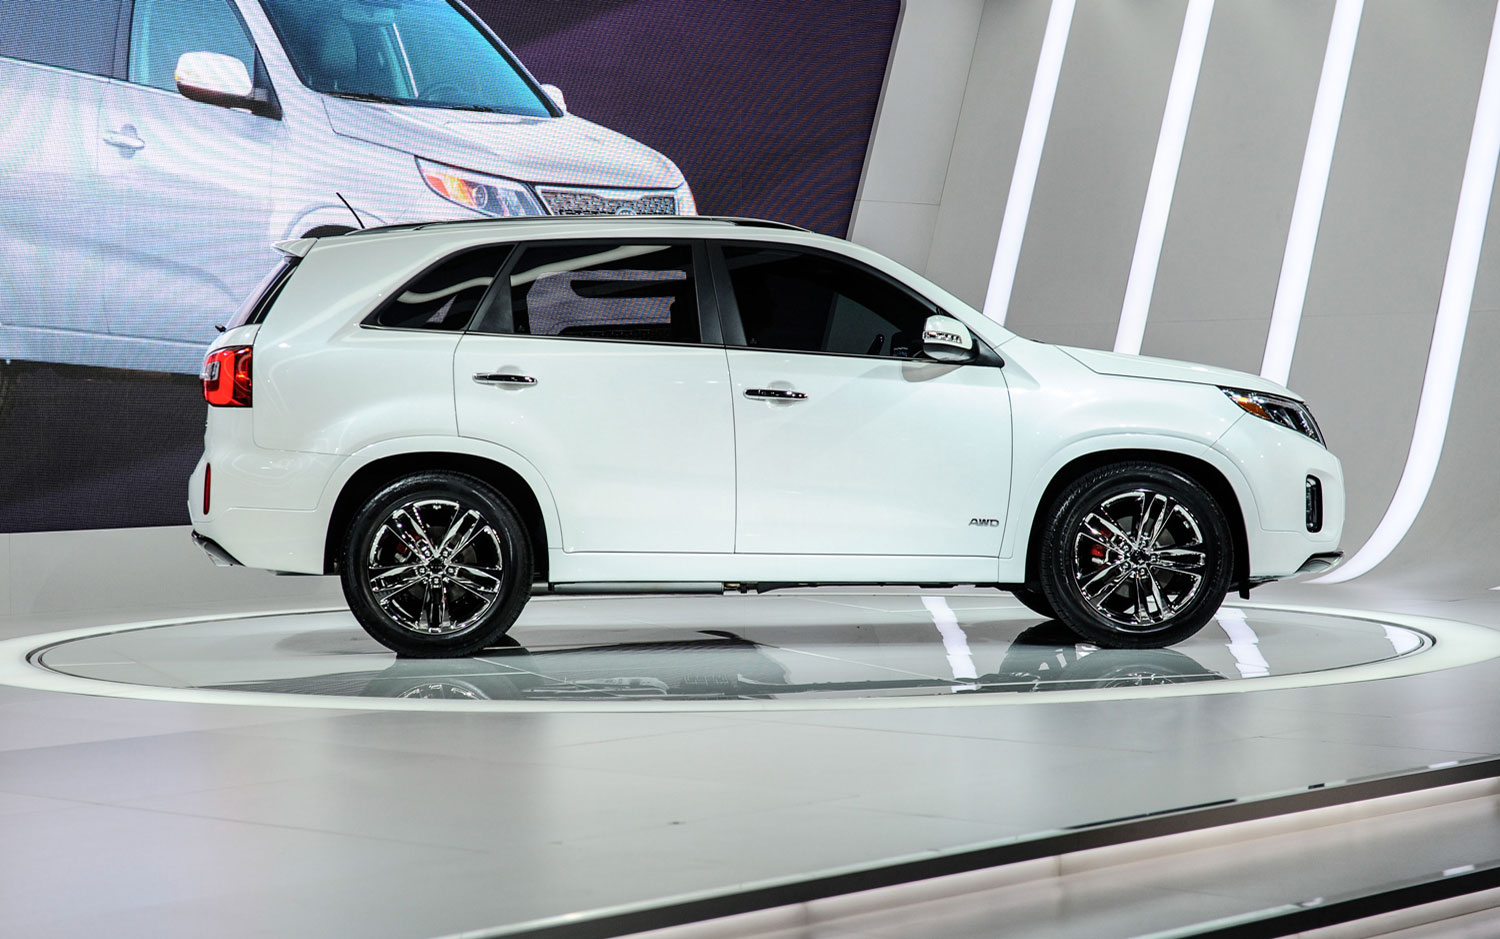 Cars Model 2013 2014: Refreshed 2014 Kia Sorento is Ready for Crossover ...